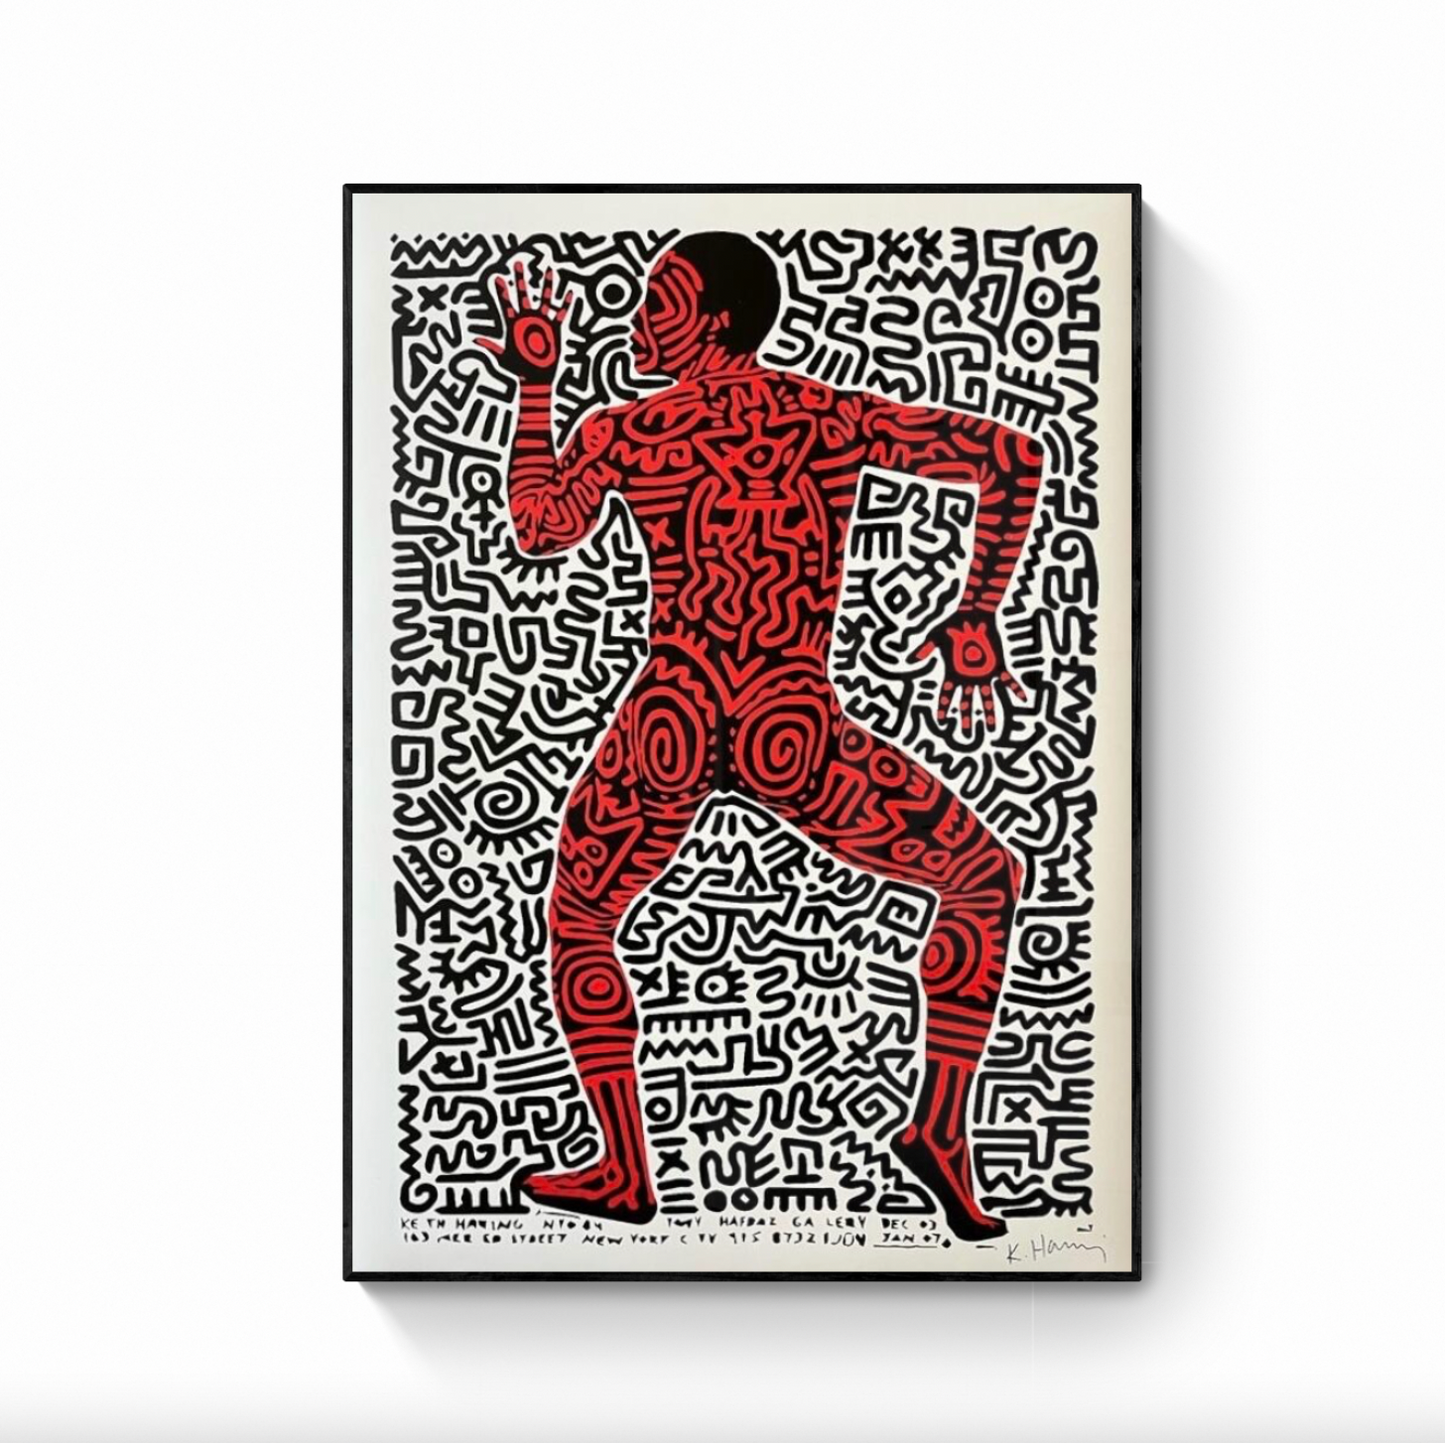 Keith Haring, Official poster - SAVE 35%